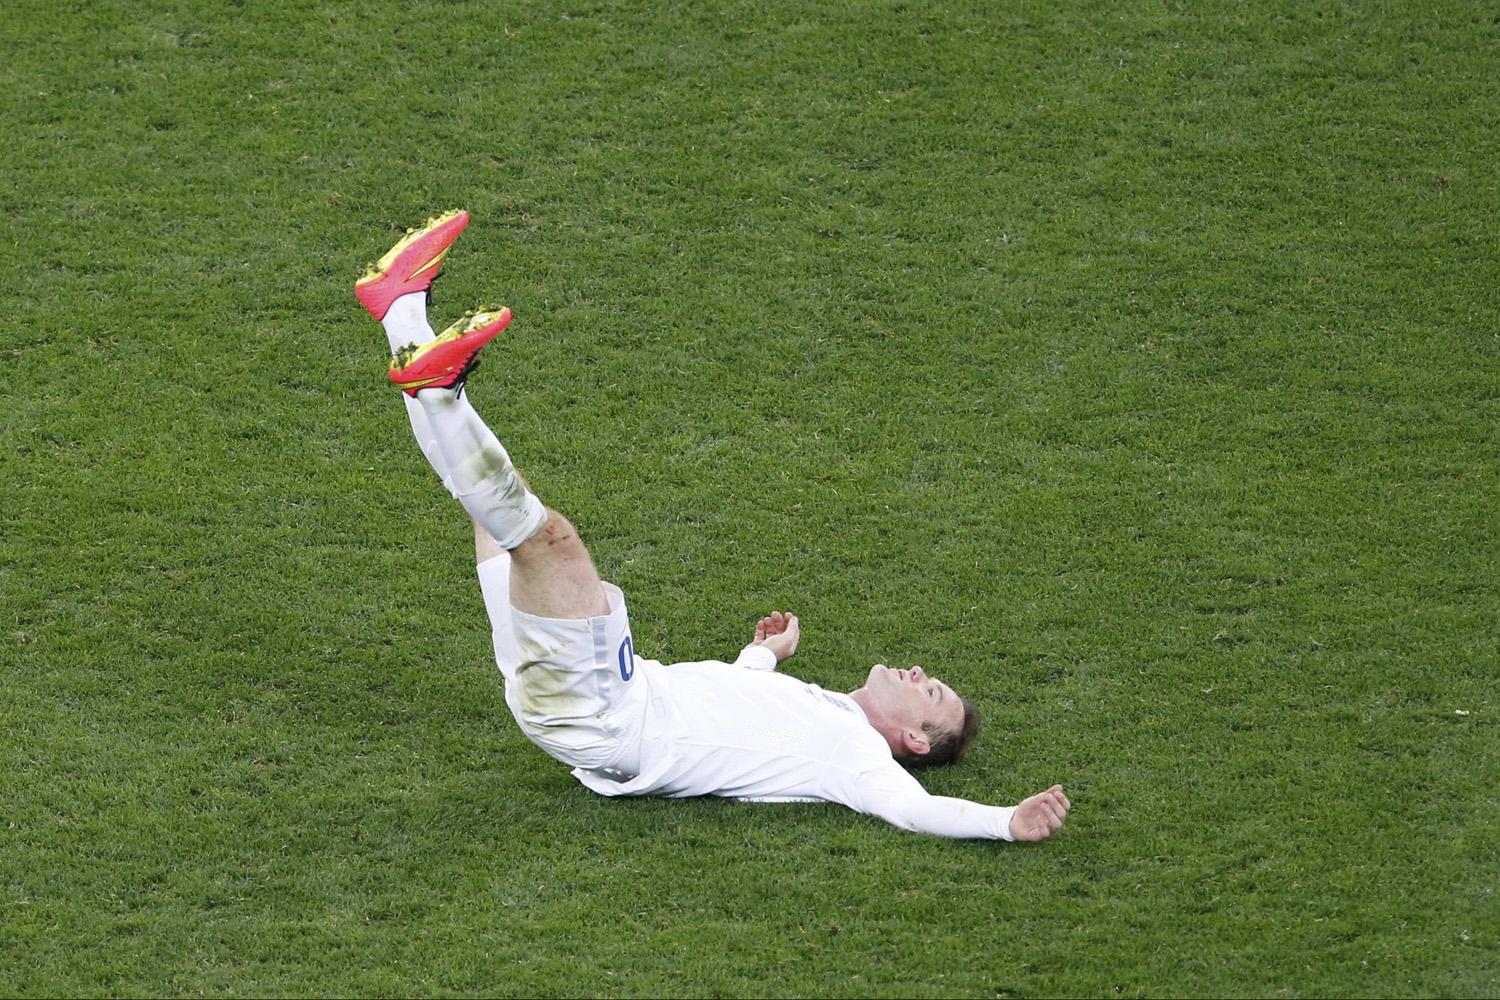 England's Rooney reacts to missing a goal during their 2014 World Cup Group D soccer match against Uruguay at the Corinthians arena in Sao Paulo